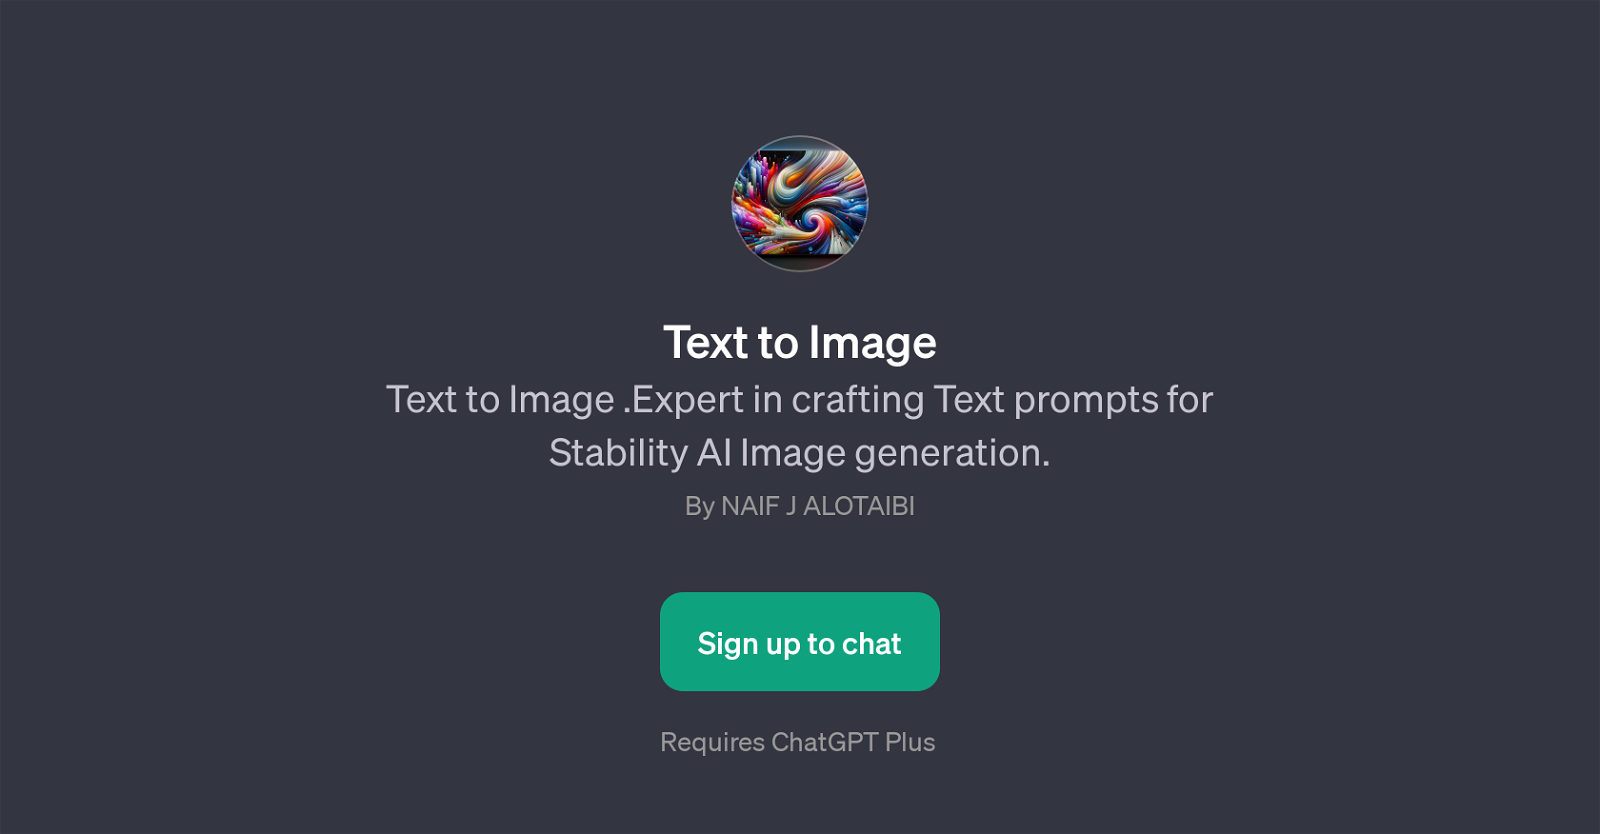 Text to Image website